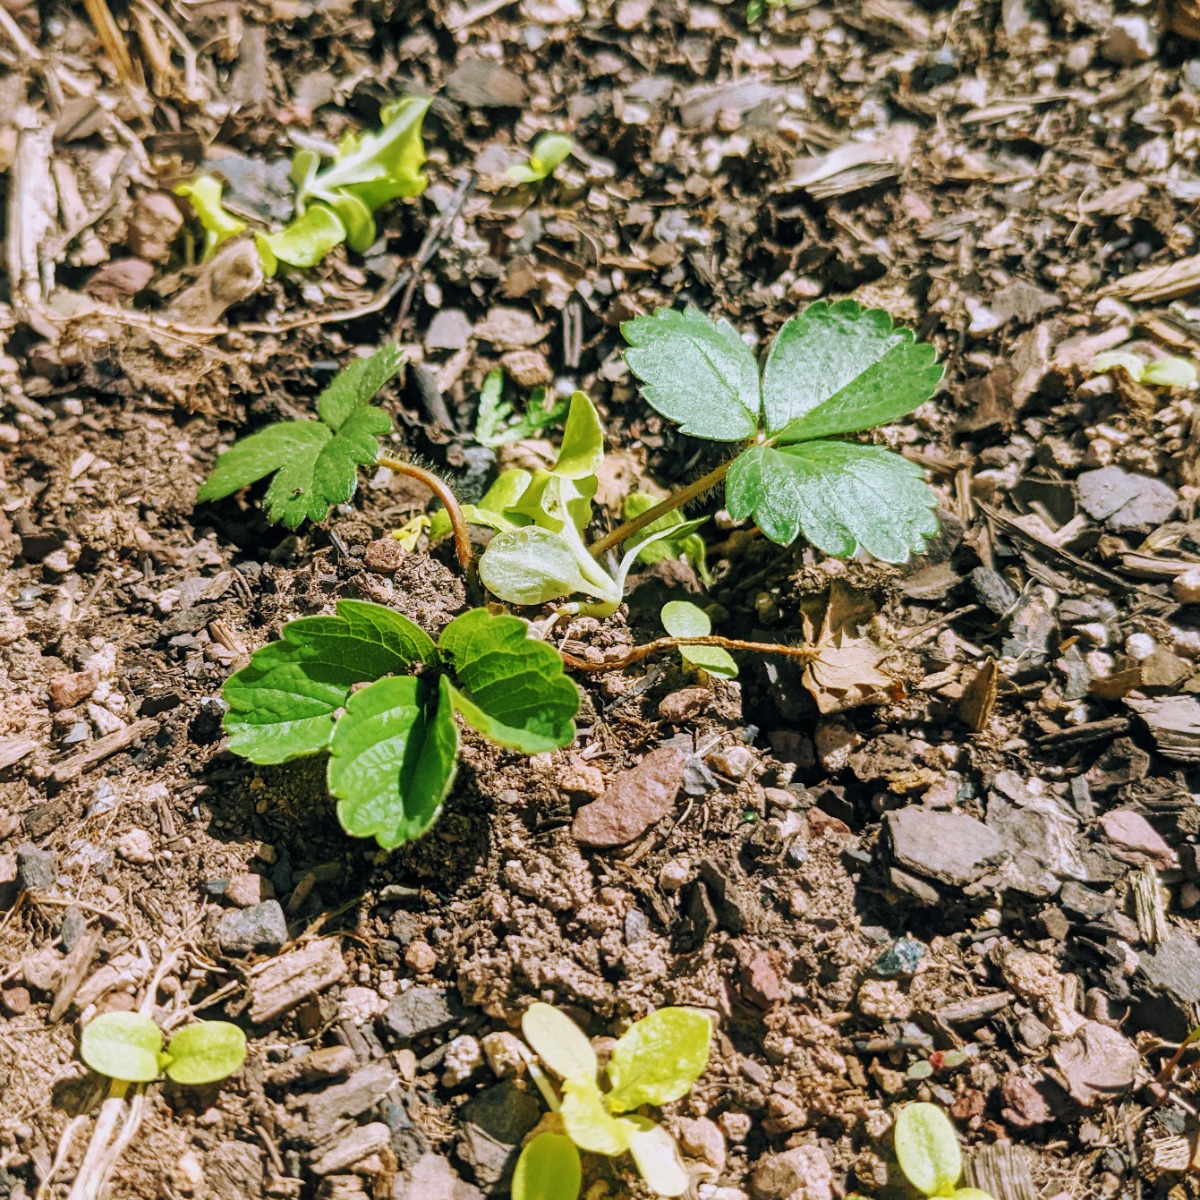 Volunteer strawberry plant with baby lettuce plants in our 2022 garden